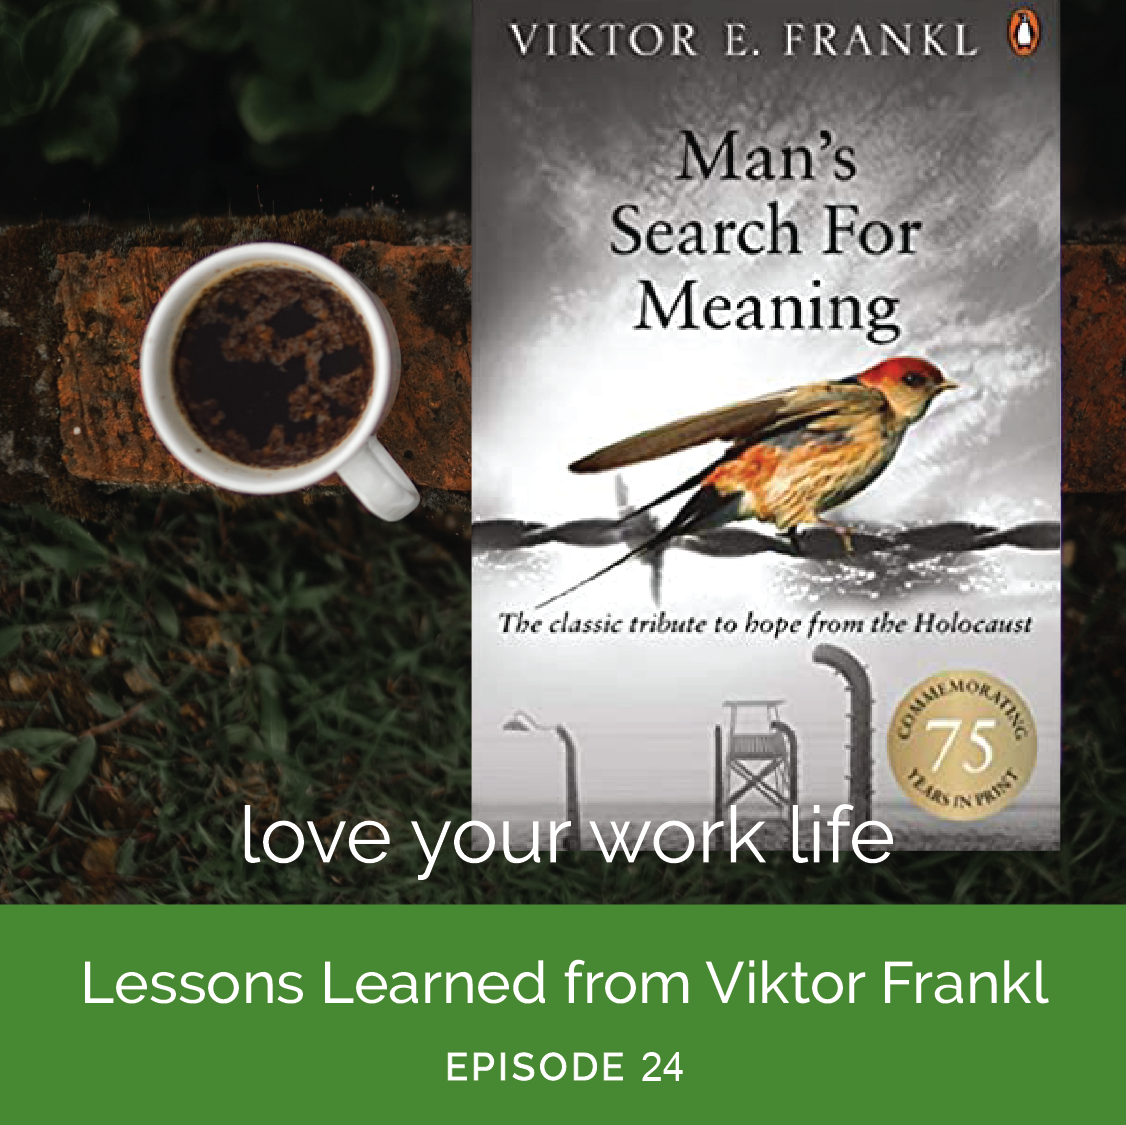 top down image of book cover (Viktor E. Frankl 